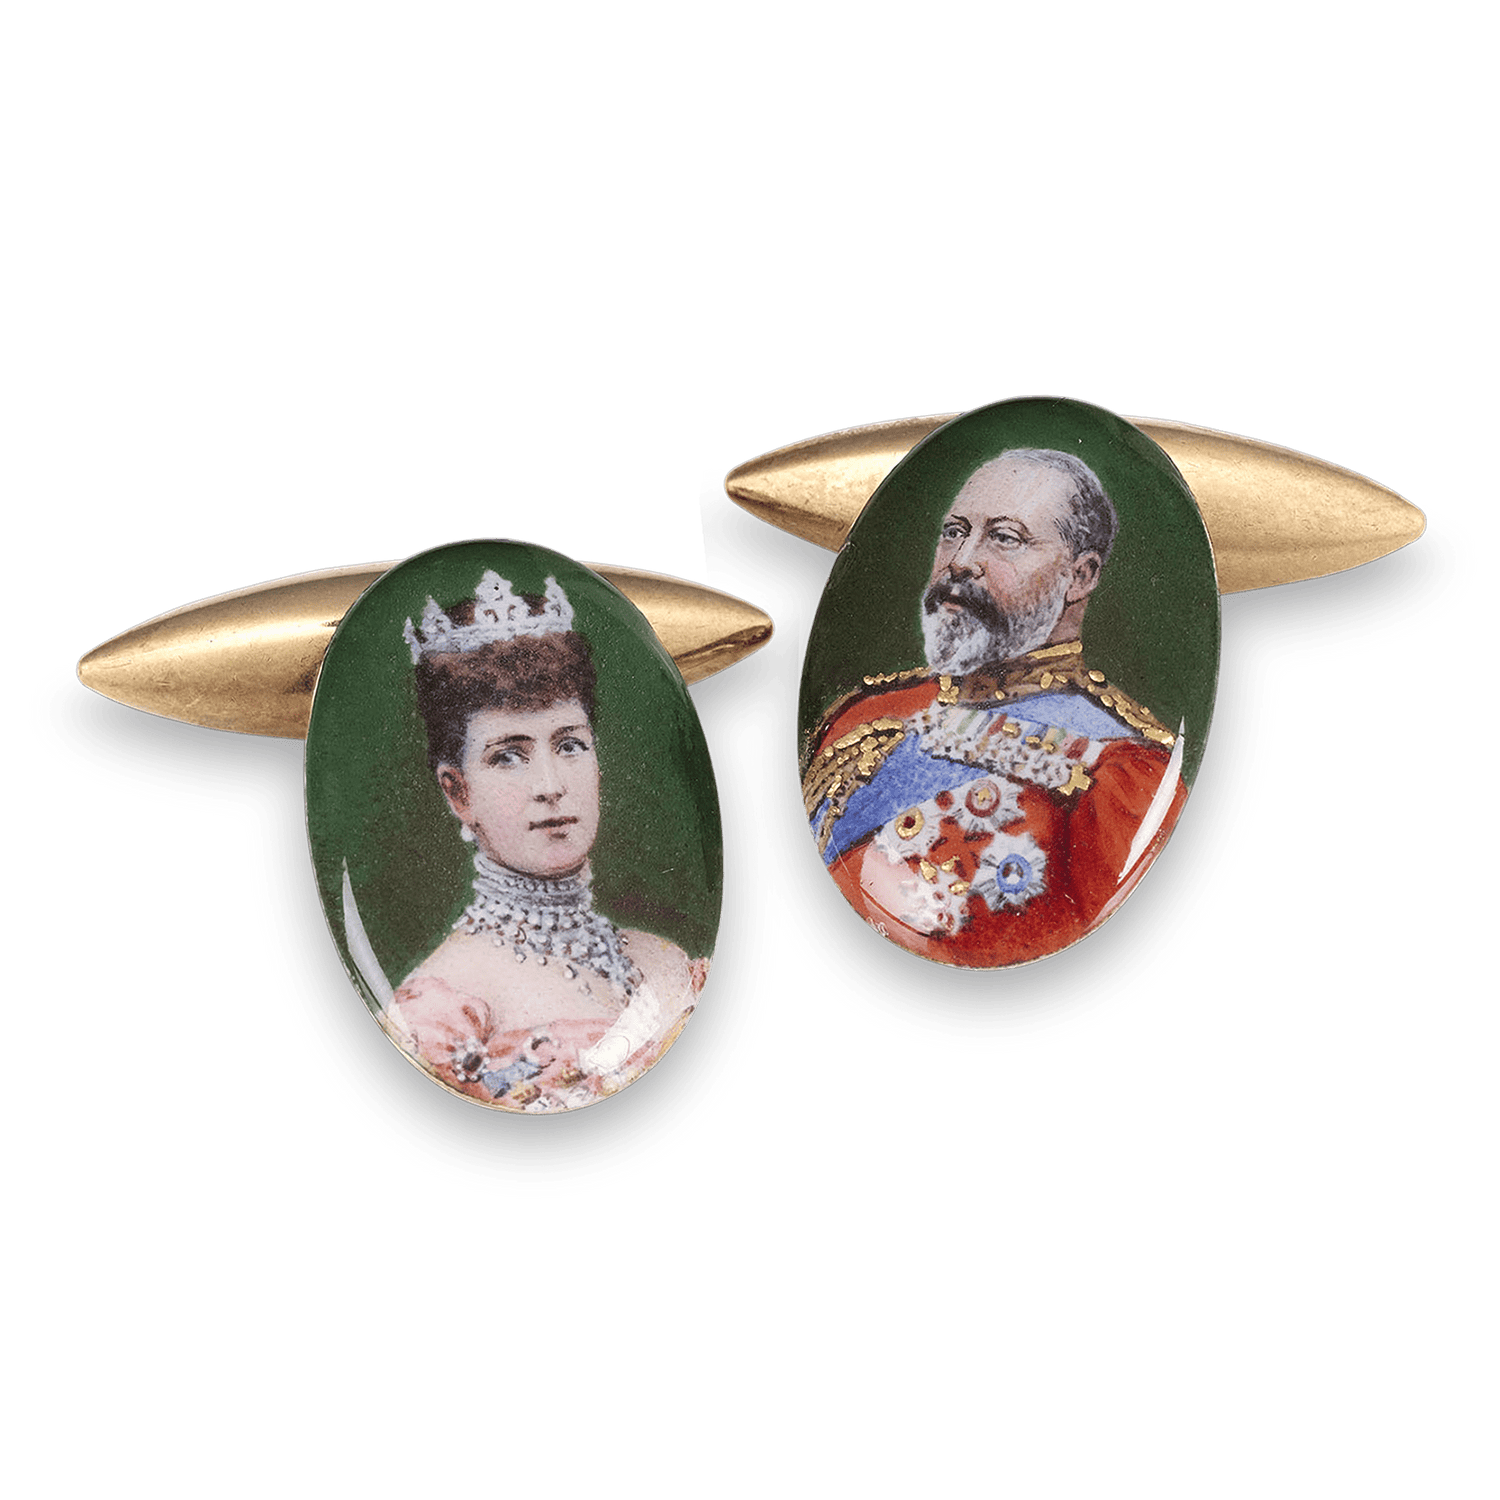 These important royal cufflinks boast portraits of Queen Alexandra and King Edward VII